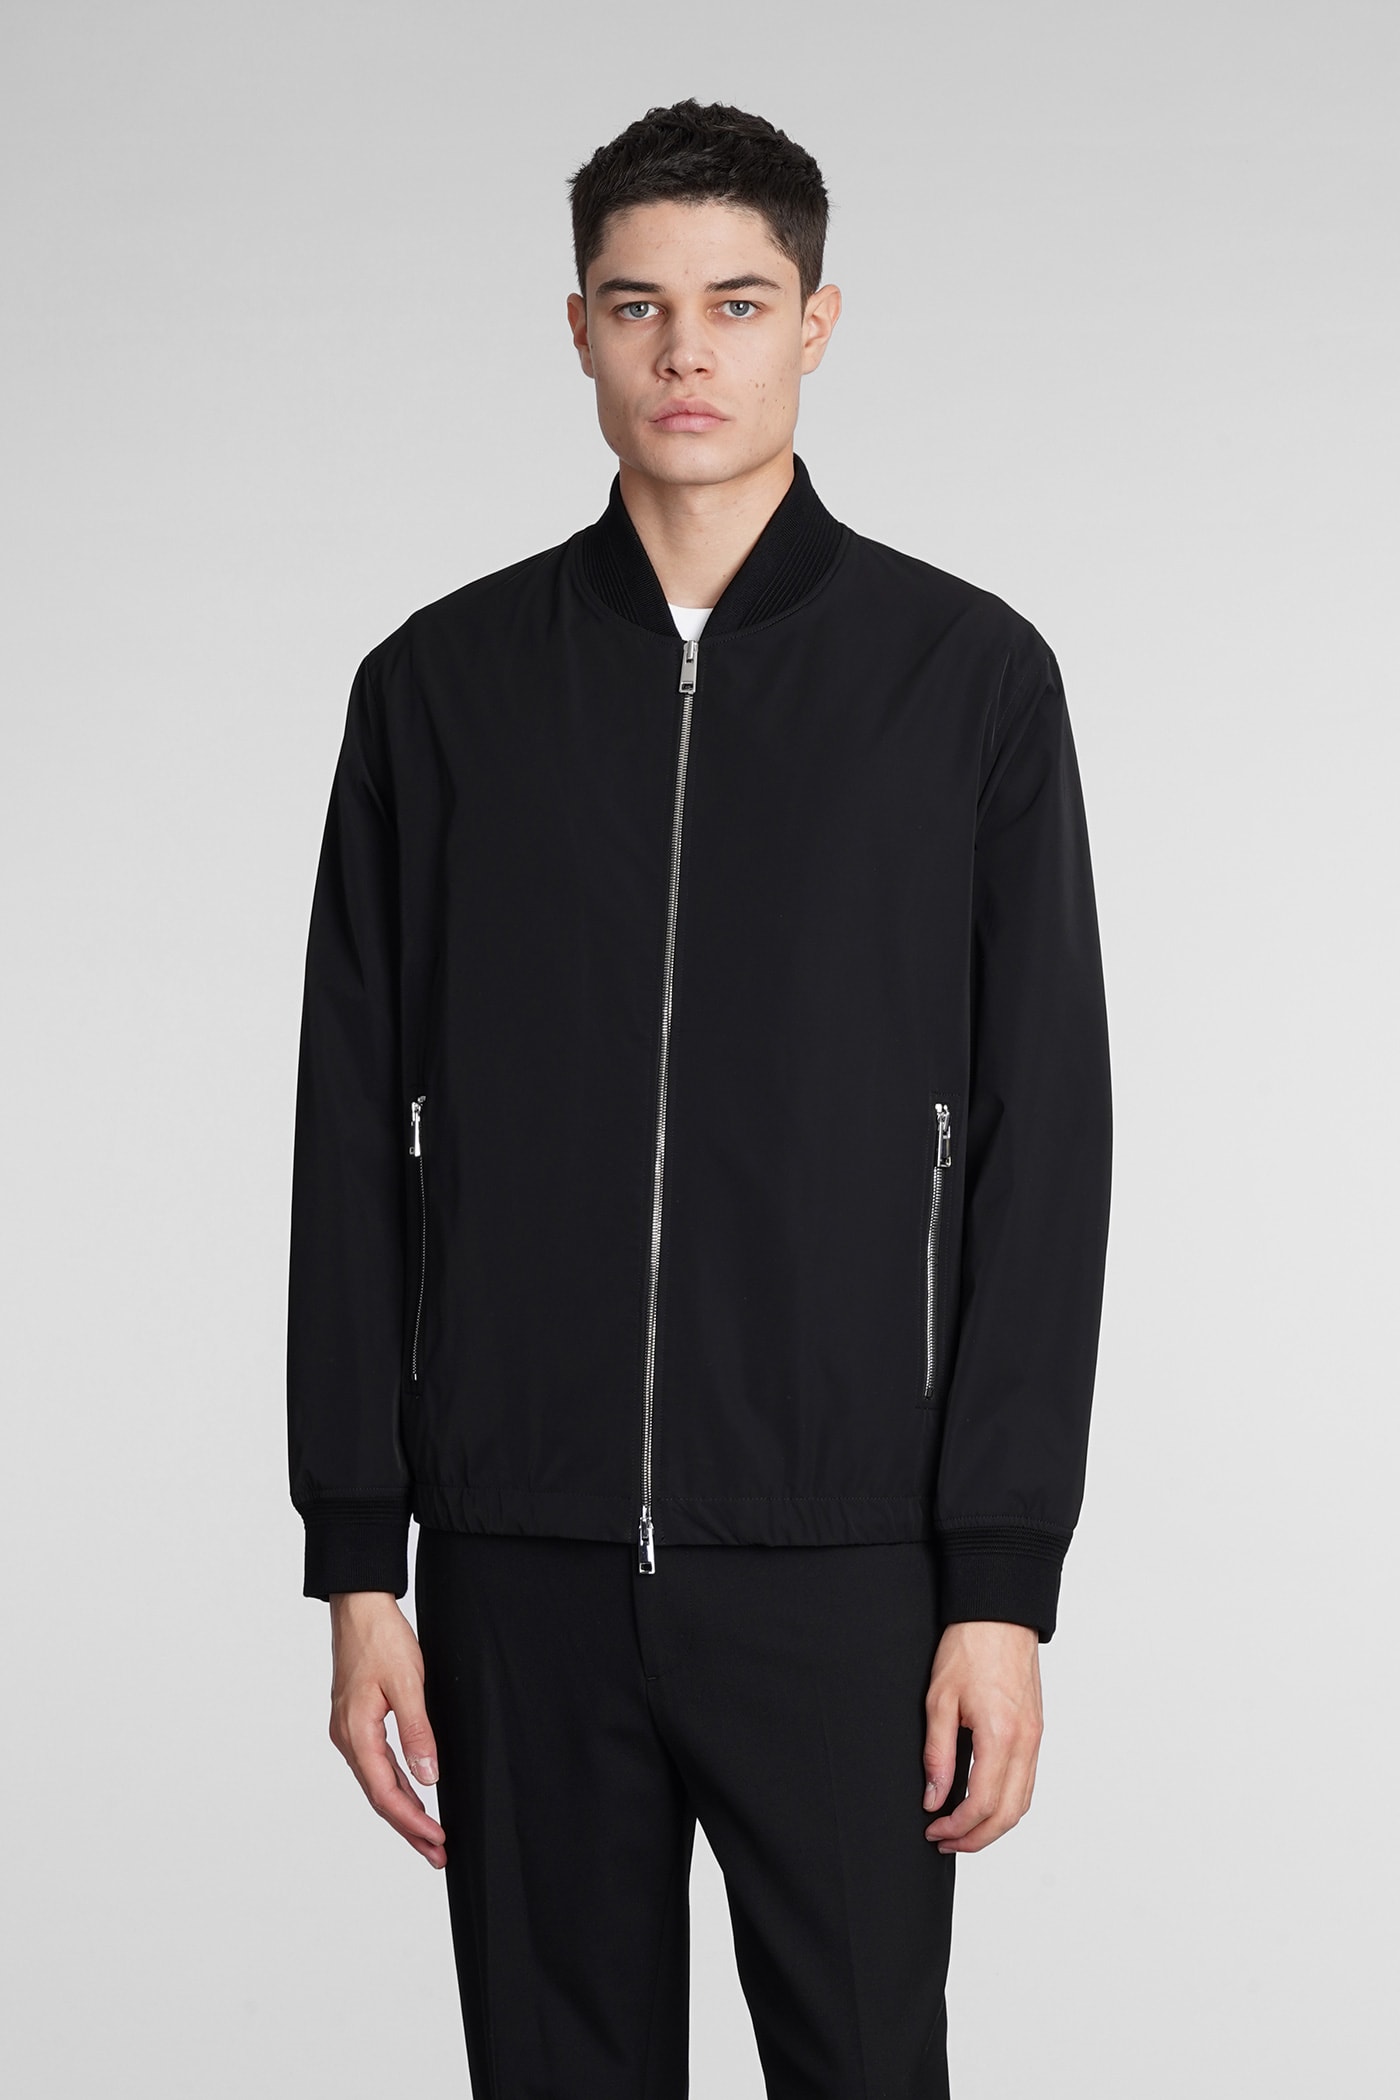 THEORY BOMBER IN BLACK POLYESTER